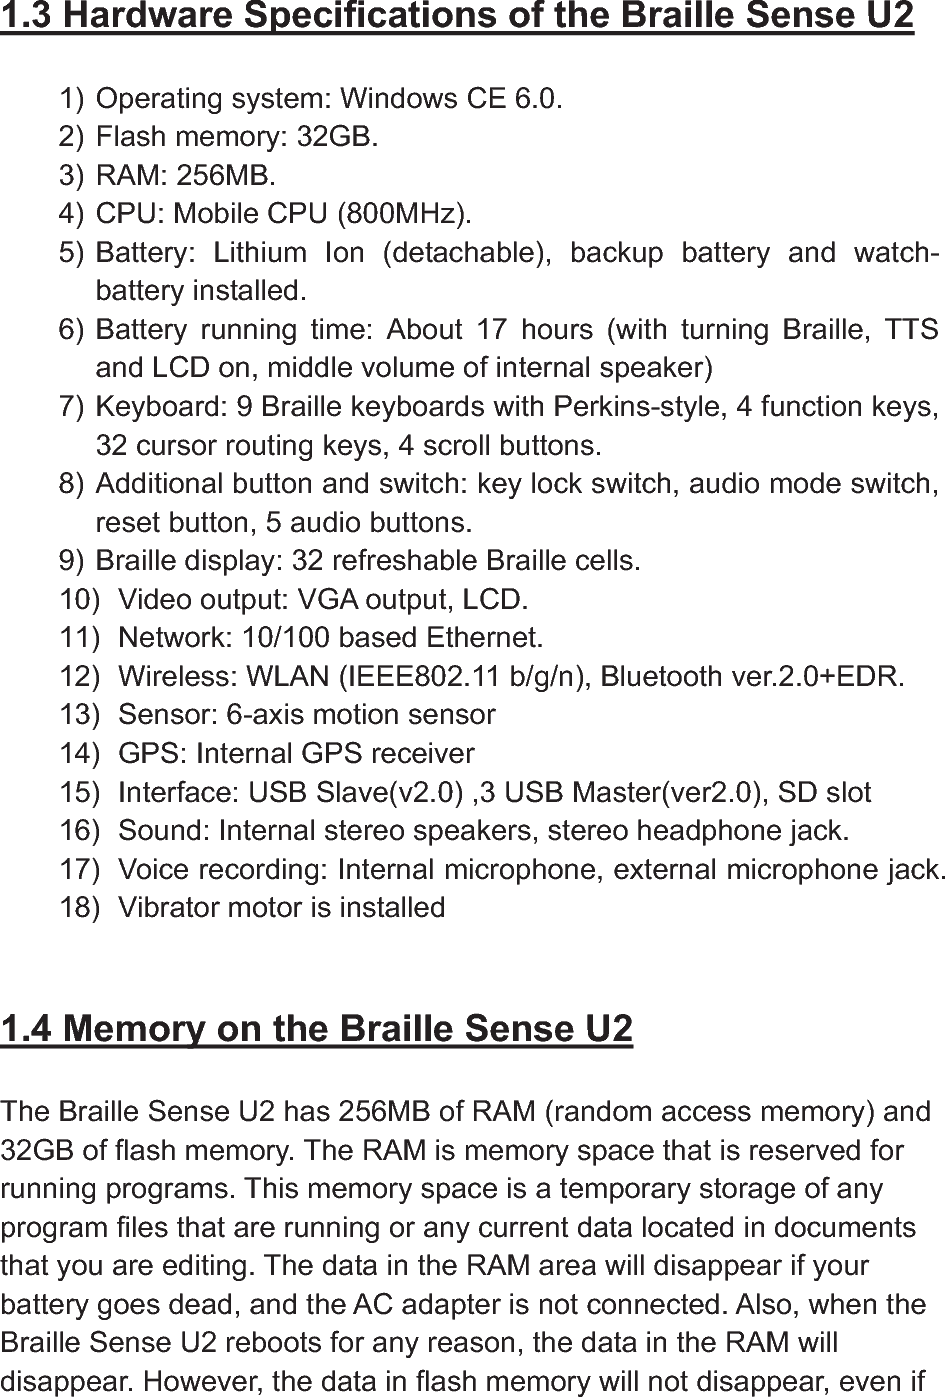 your battery goes dead, or if your unit reboots. Now that you know what the Braille Sense U2 is, move on to the next section to learn more about the basic functions of the Braille Sense U2. 